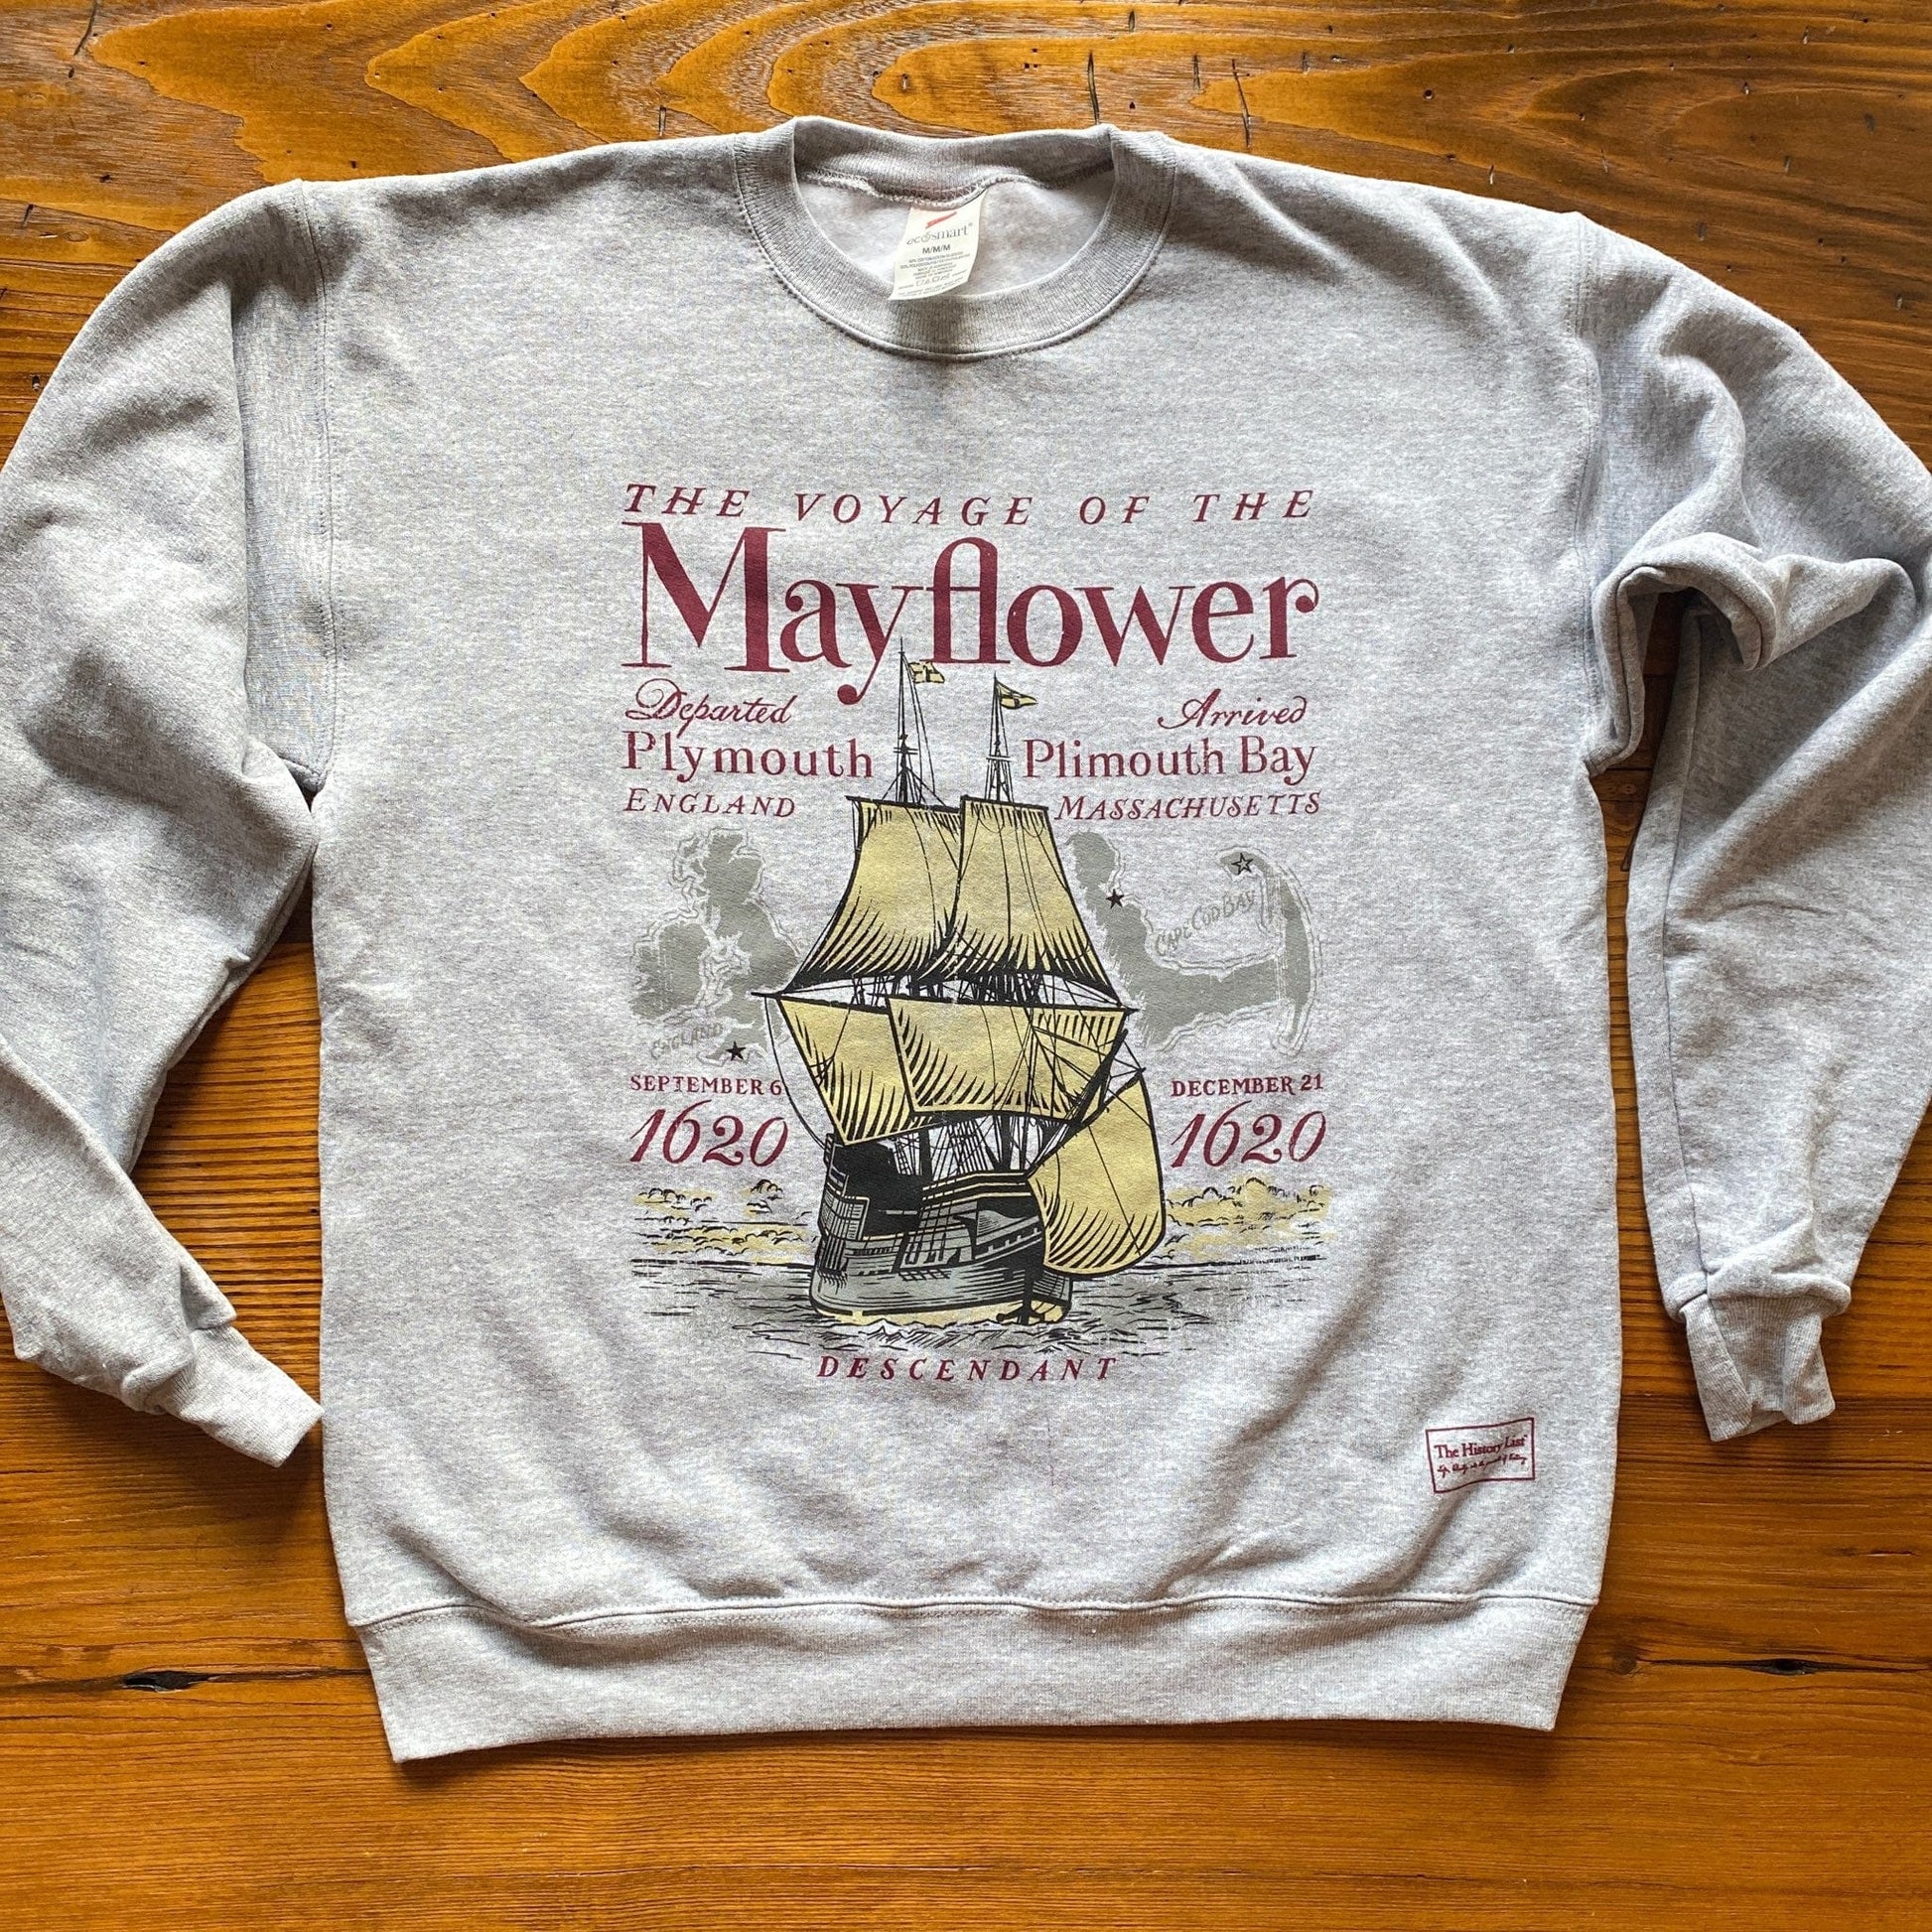 "The Voyage of the Mayflower" Crewneck sweatshirt from the History List Store